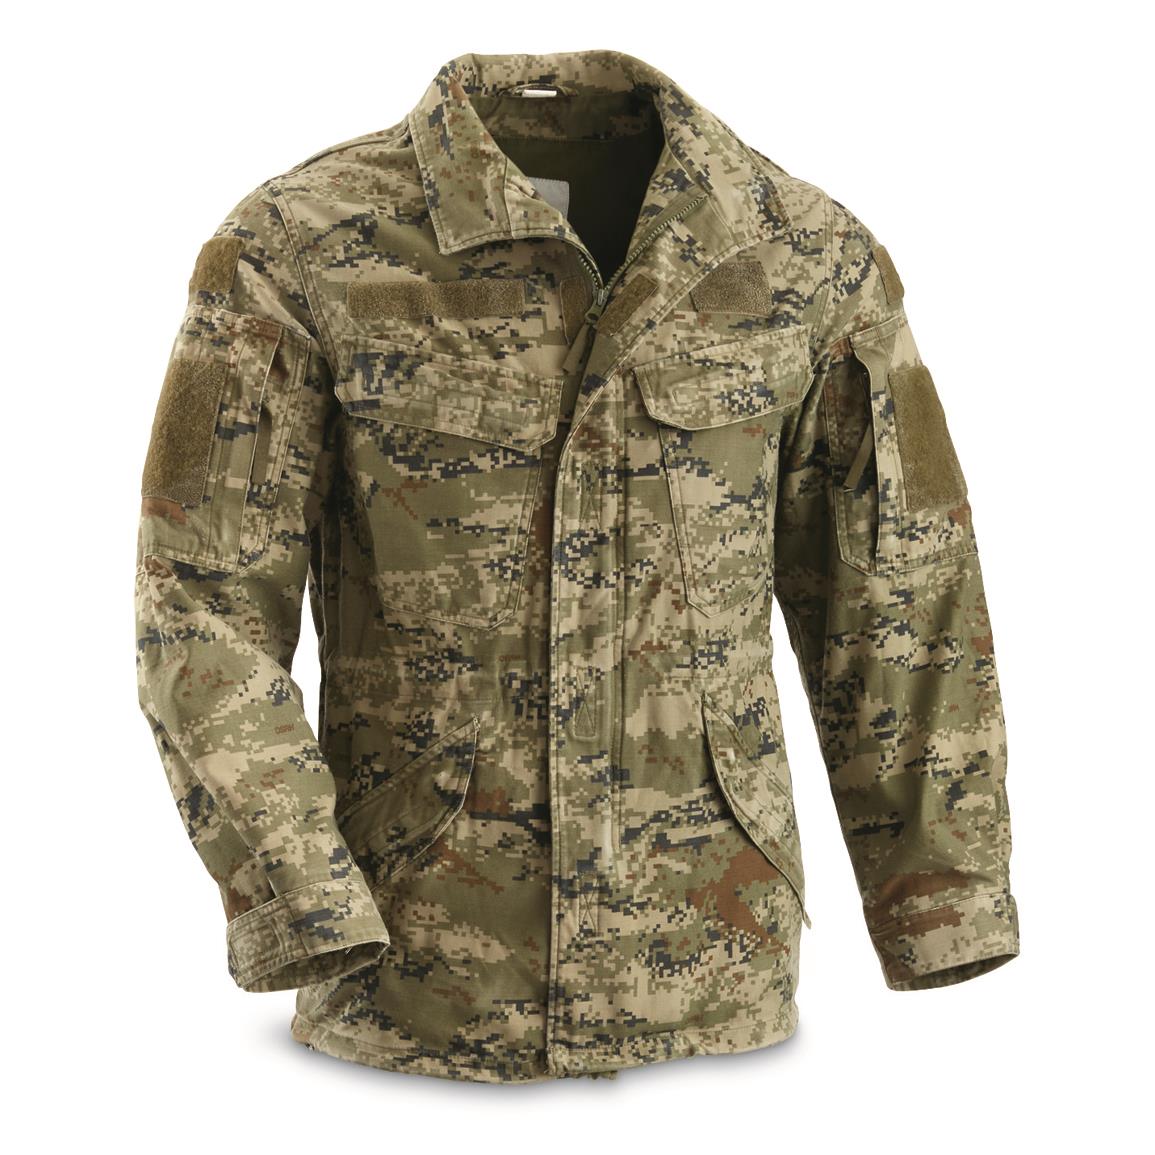 Vertical Military Jacket | Sportsman's Guide